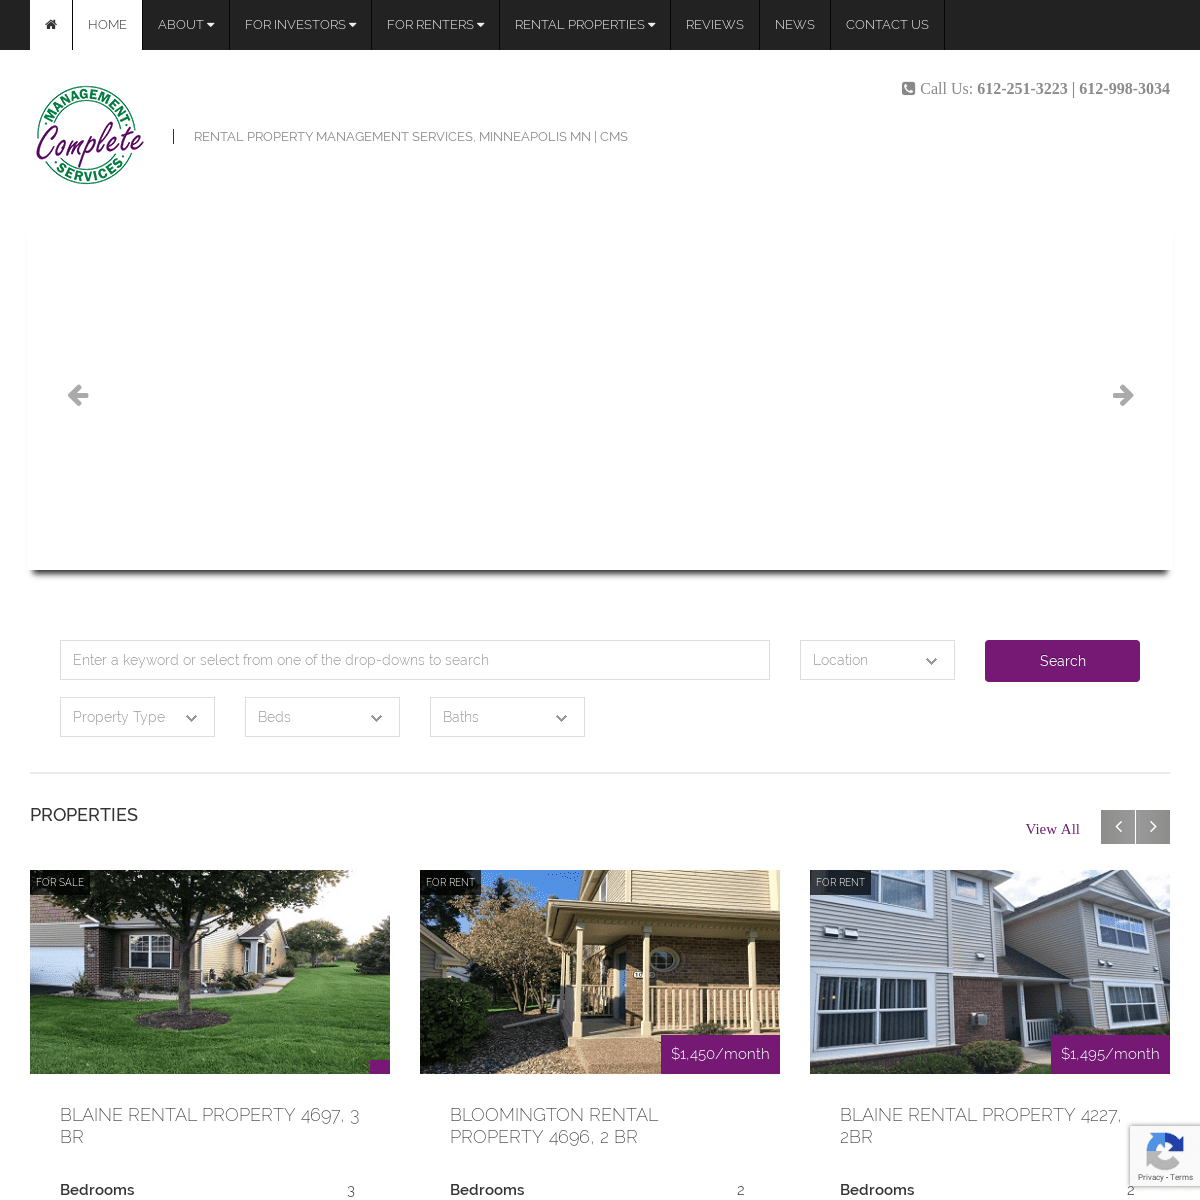 Homepage - Rental Property Management Services, Minneapolis MN | CMS